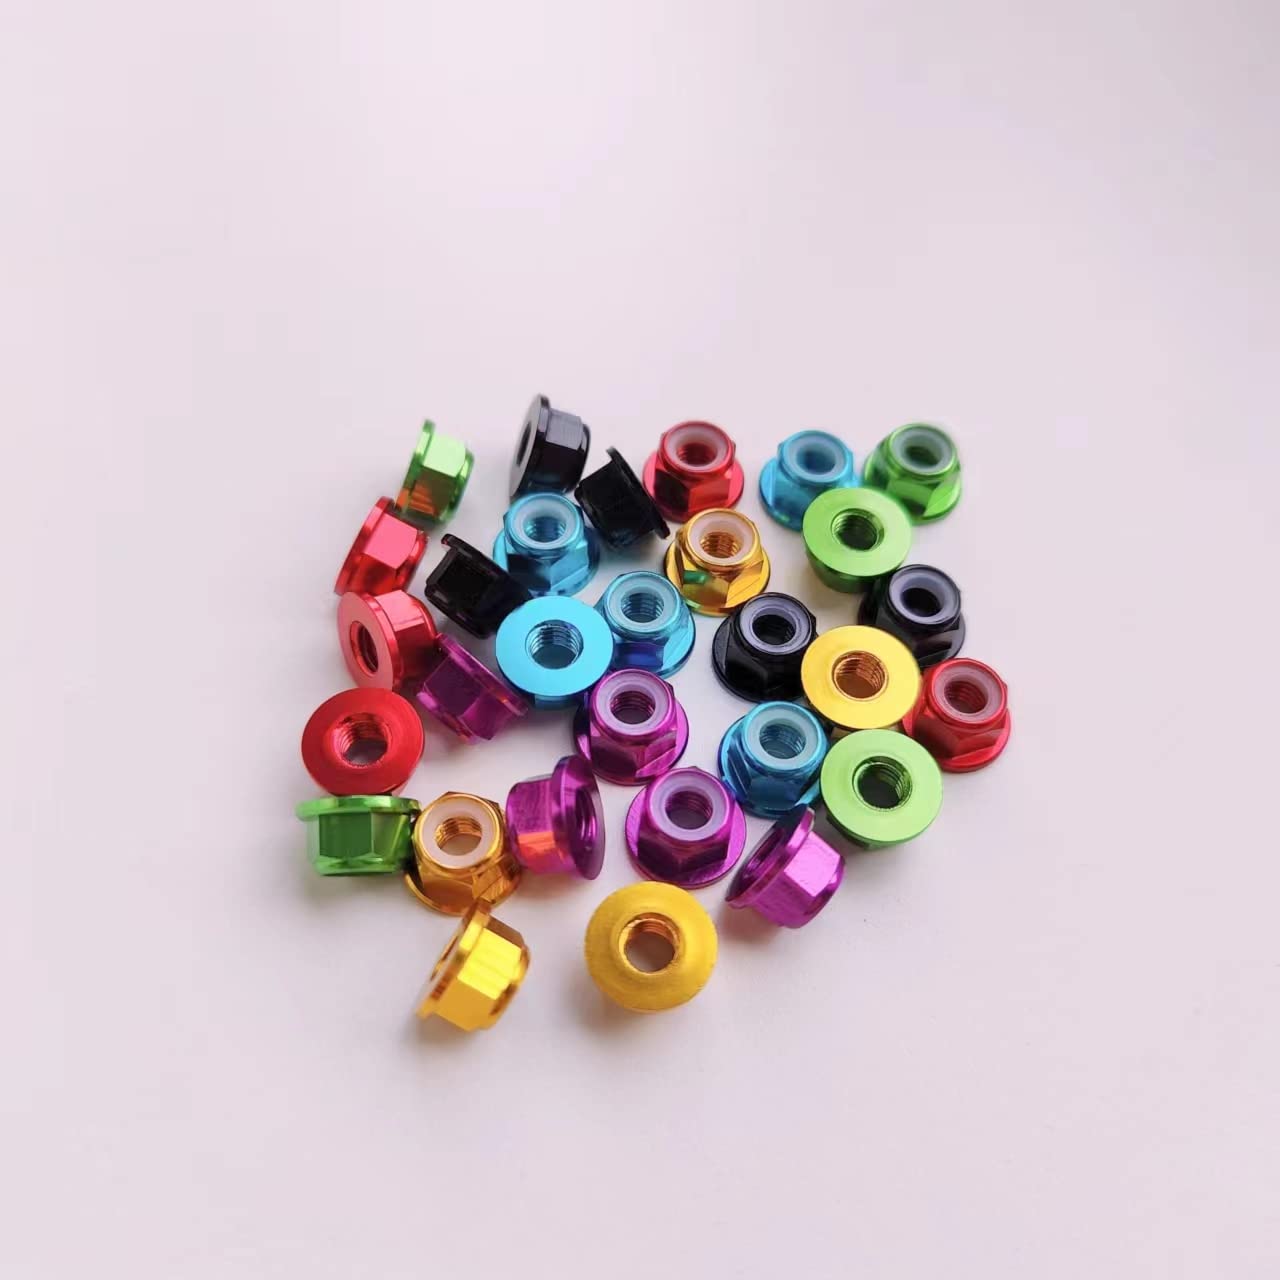 30pcs FPV M5 Nuts CW Self-Locking Lock Nuts Flanged Nylon Insert Aluminum Alloy for FPV Parts Quadcopter Motor Prop Adapter RC Racing Drone (6 Colors)